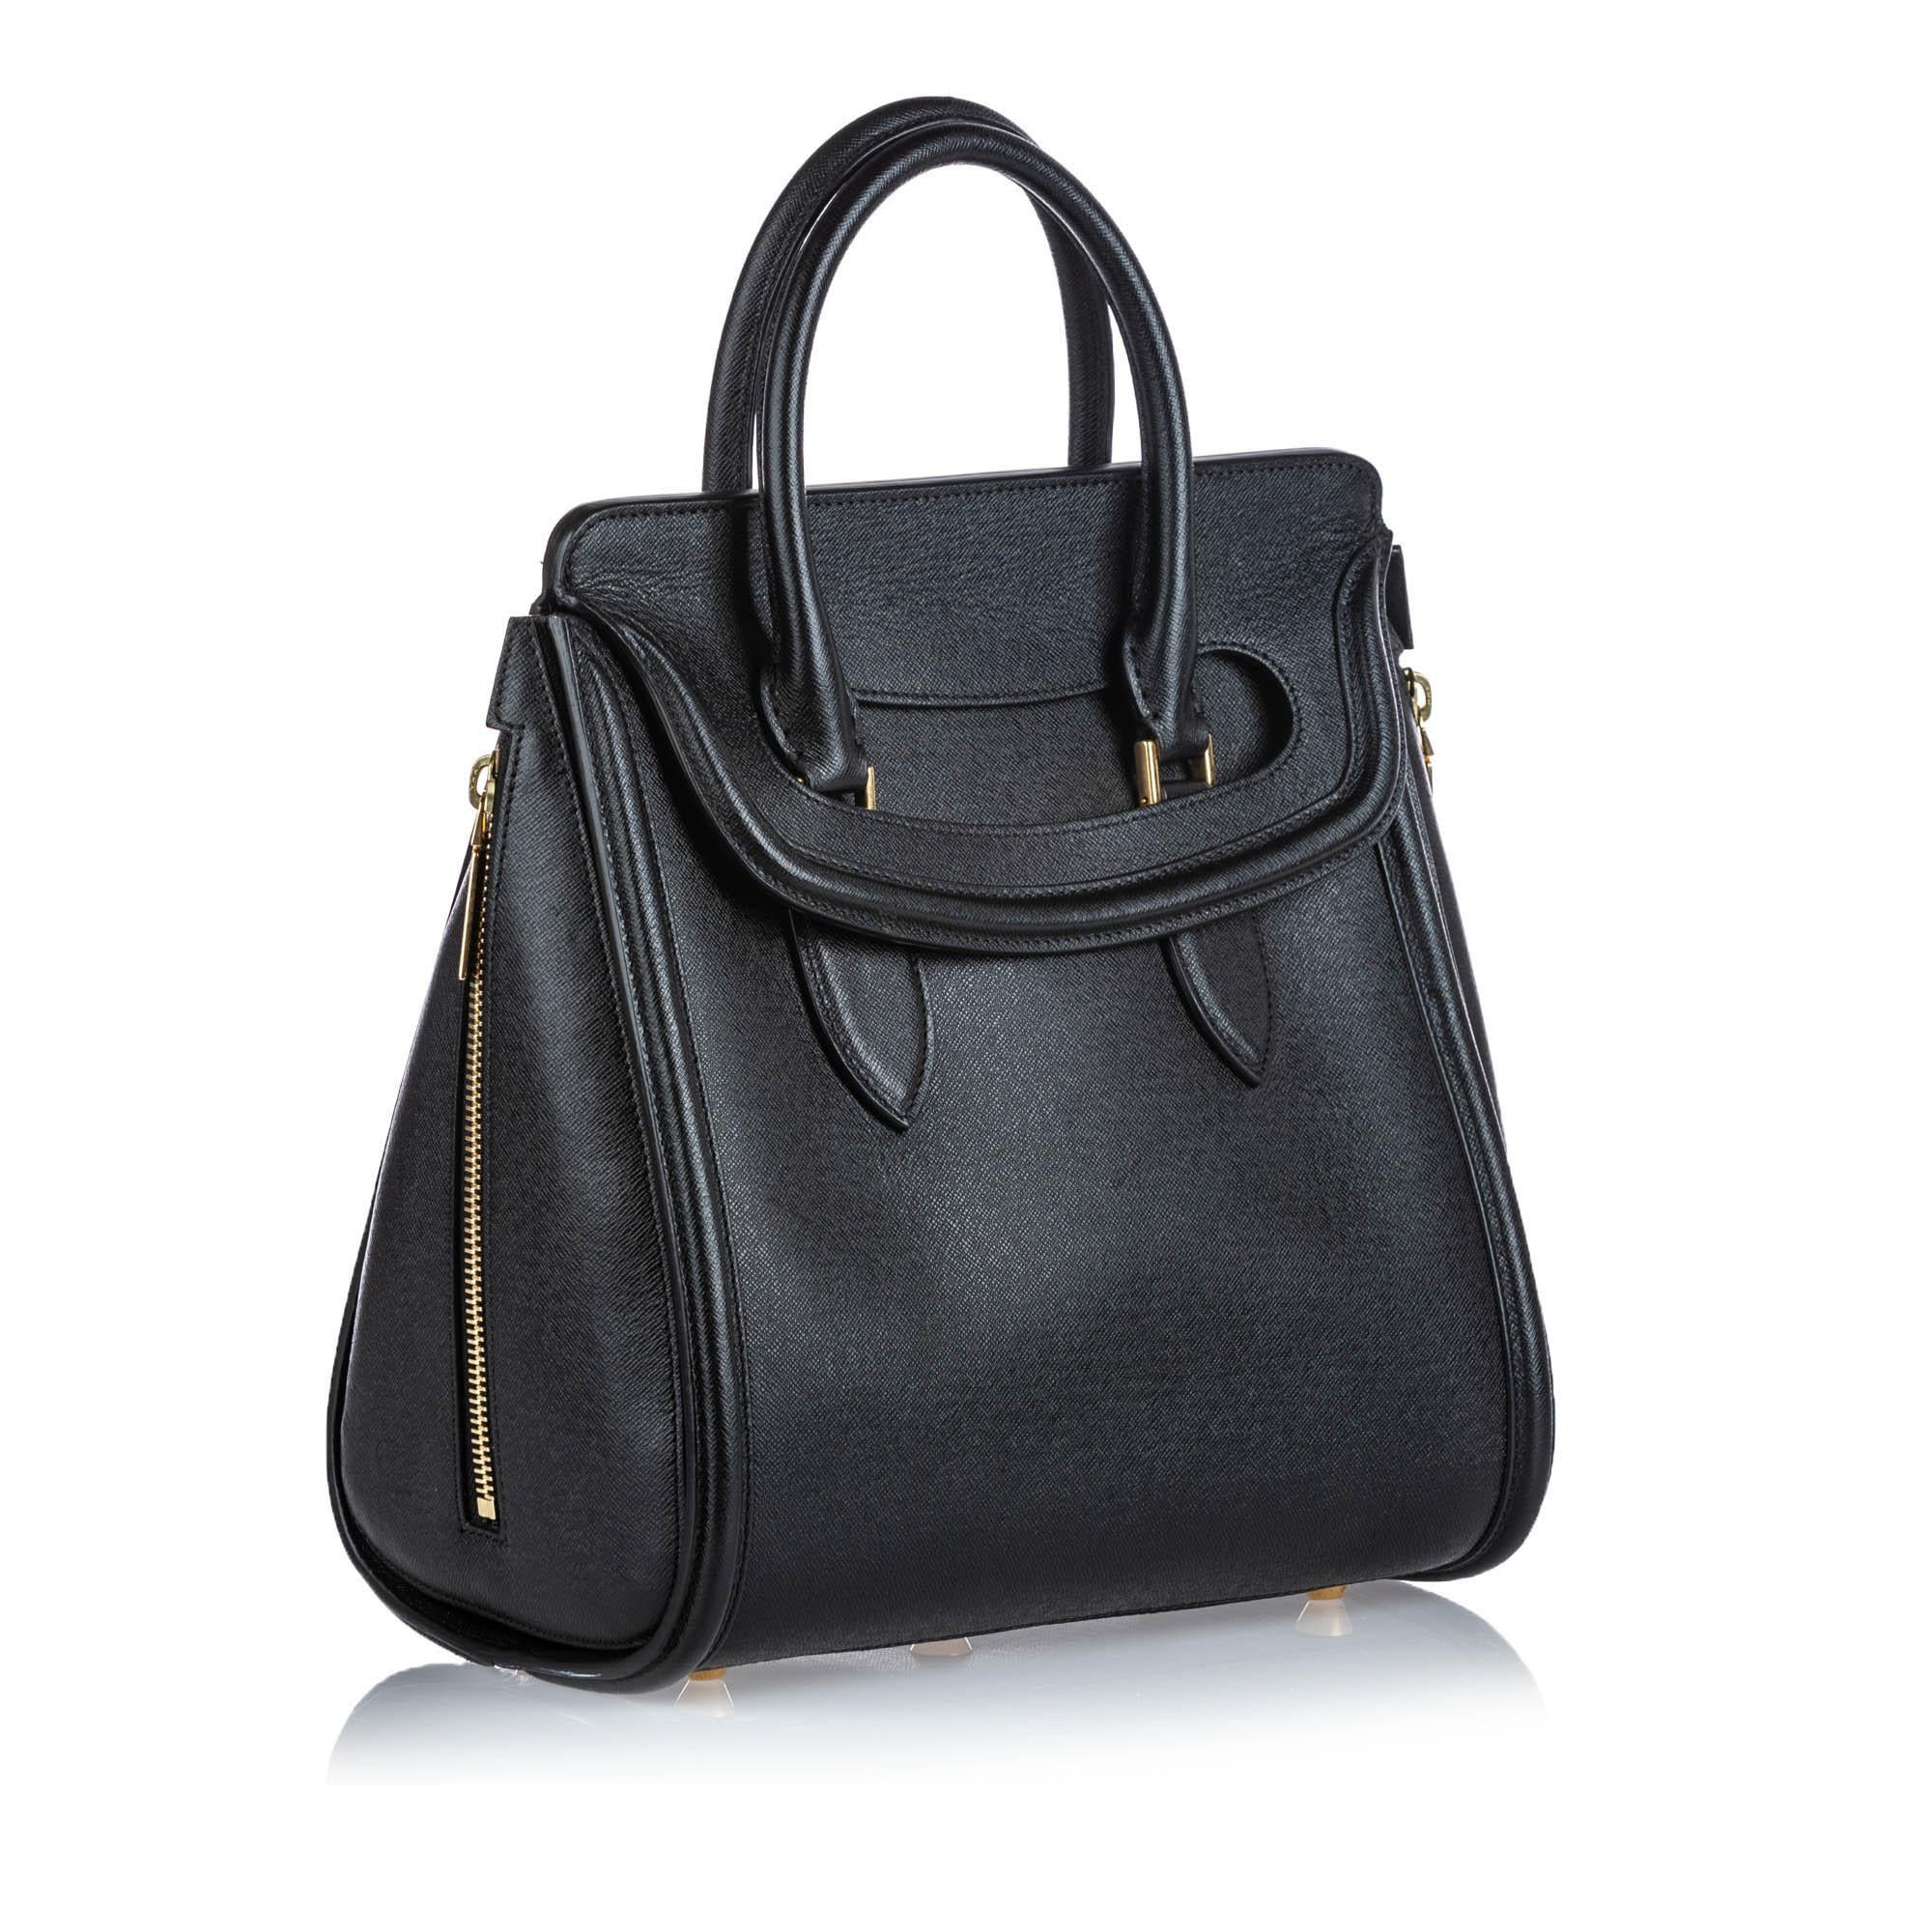 This Heroine satchel features a leather body, rolled leather handles, a top flap closure, and an interior zip pocket. It carries as AB condition rating.

Inclusions: 
This item does not come with inclusions.

Dimensions:
Length: 28.00 cm
Width: